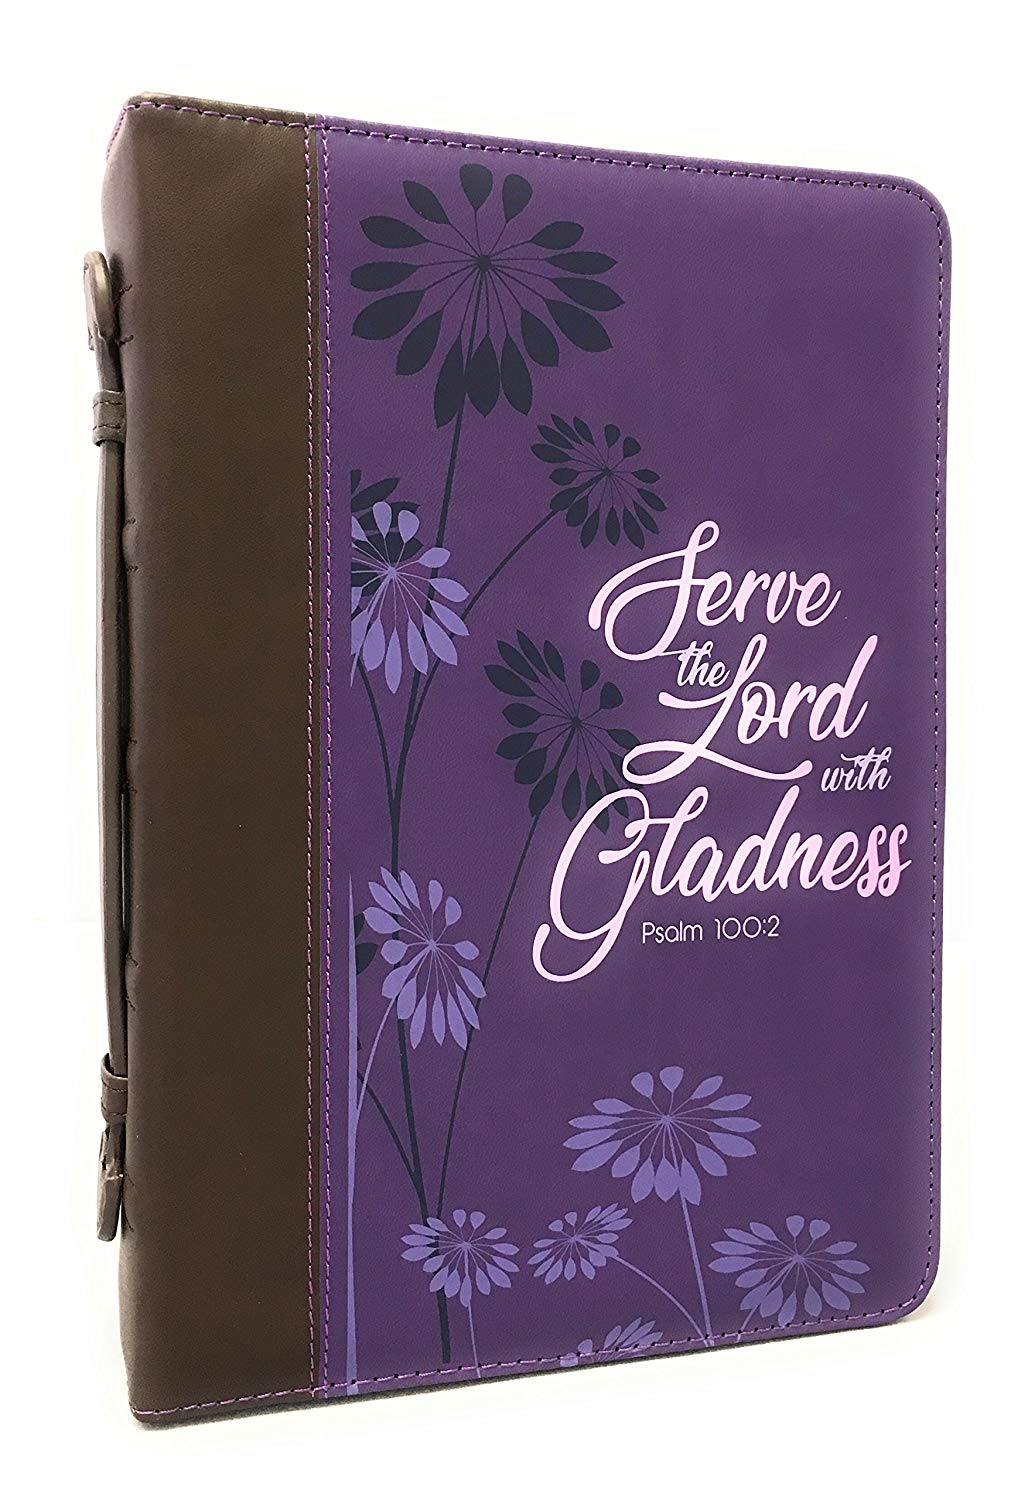 Women's Bible Cover , “Serve The Lord with Gladness- Psalm 100:2" - RingBinderDepot.com